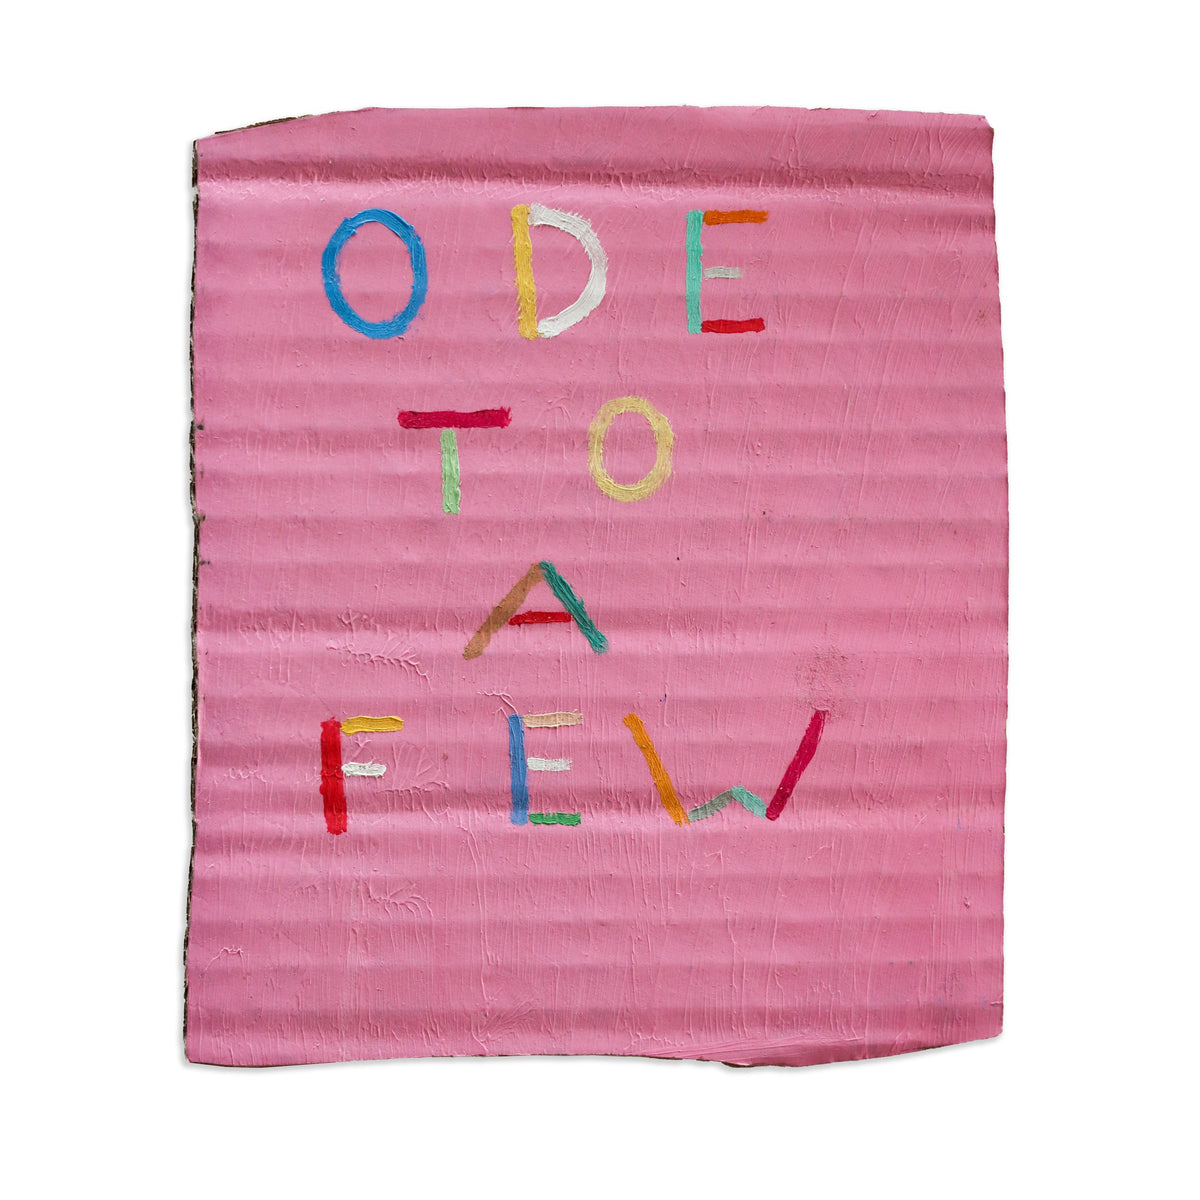 James Hale | ODE TO A FEW (PINK)